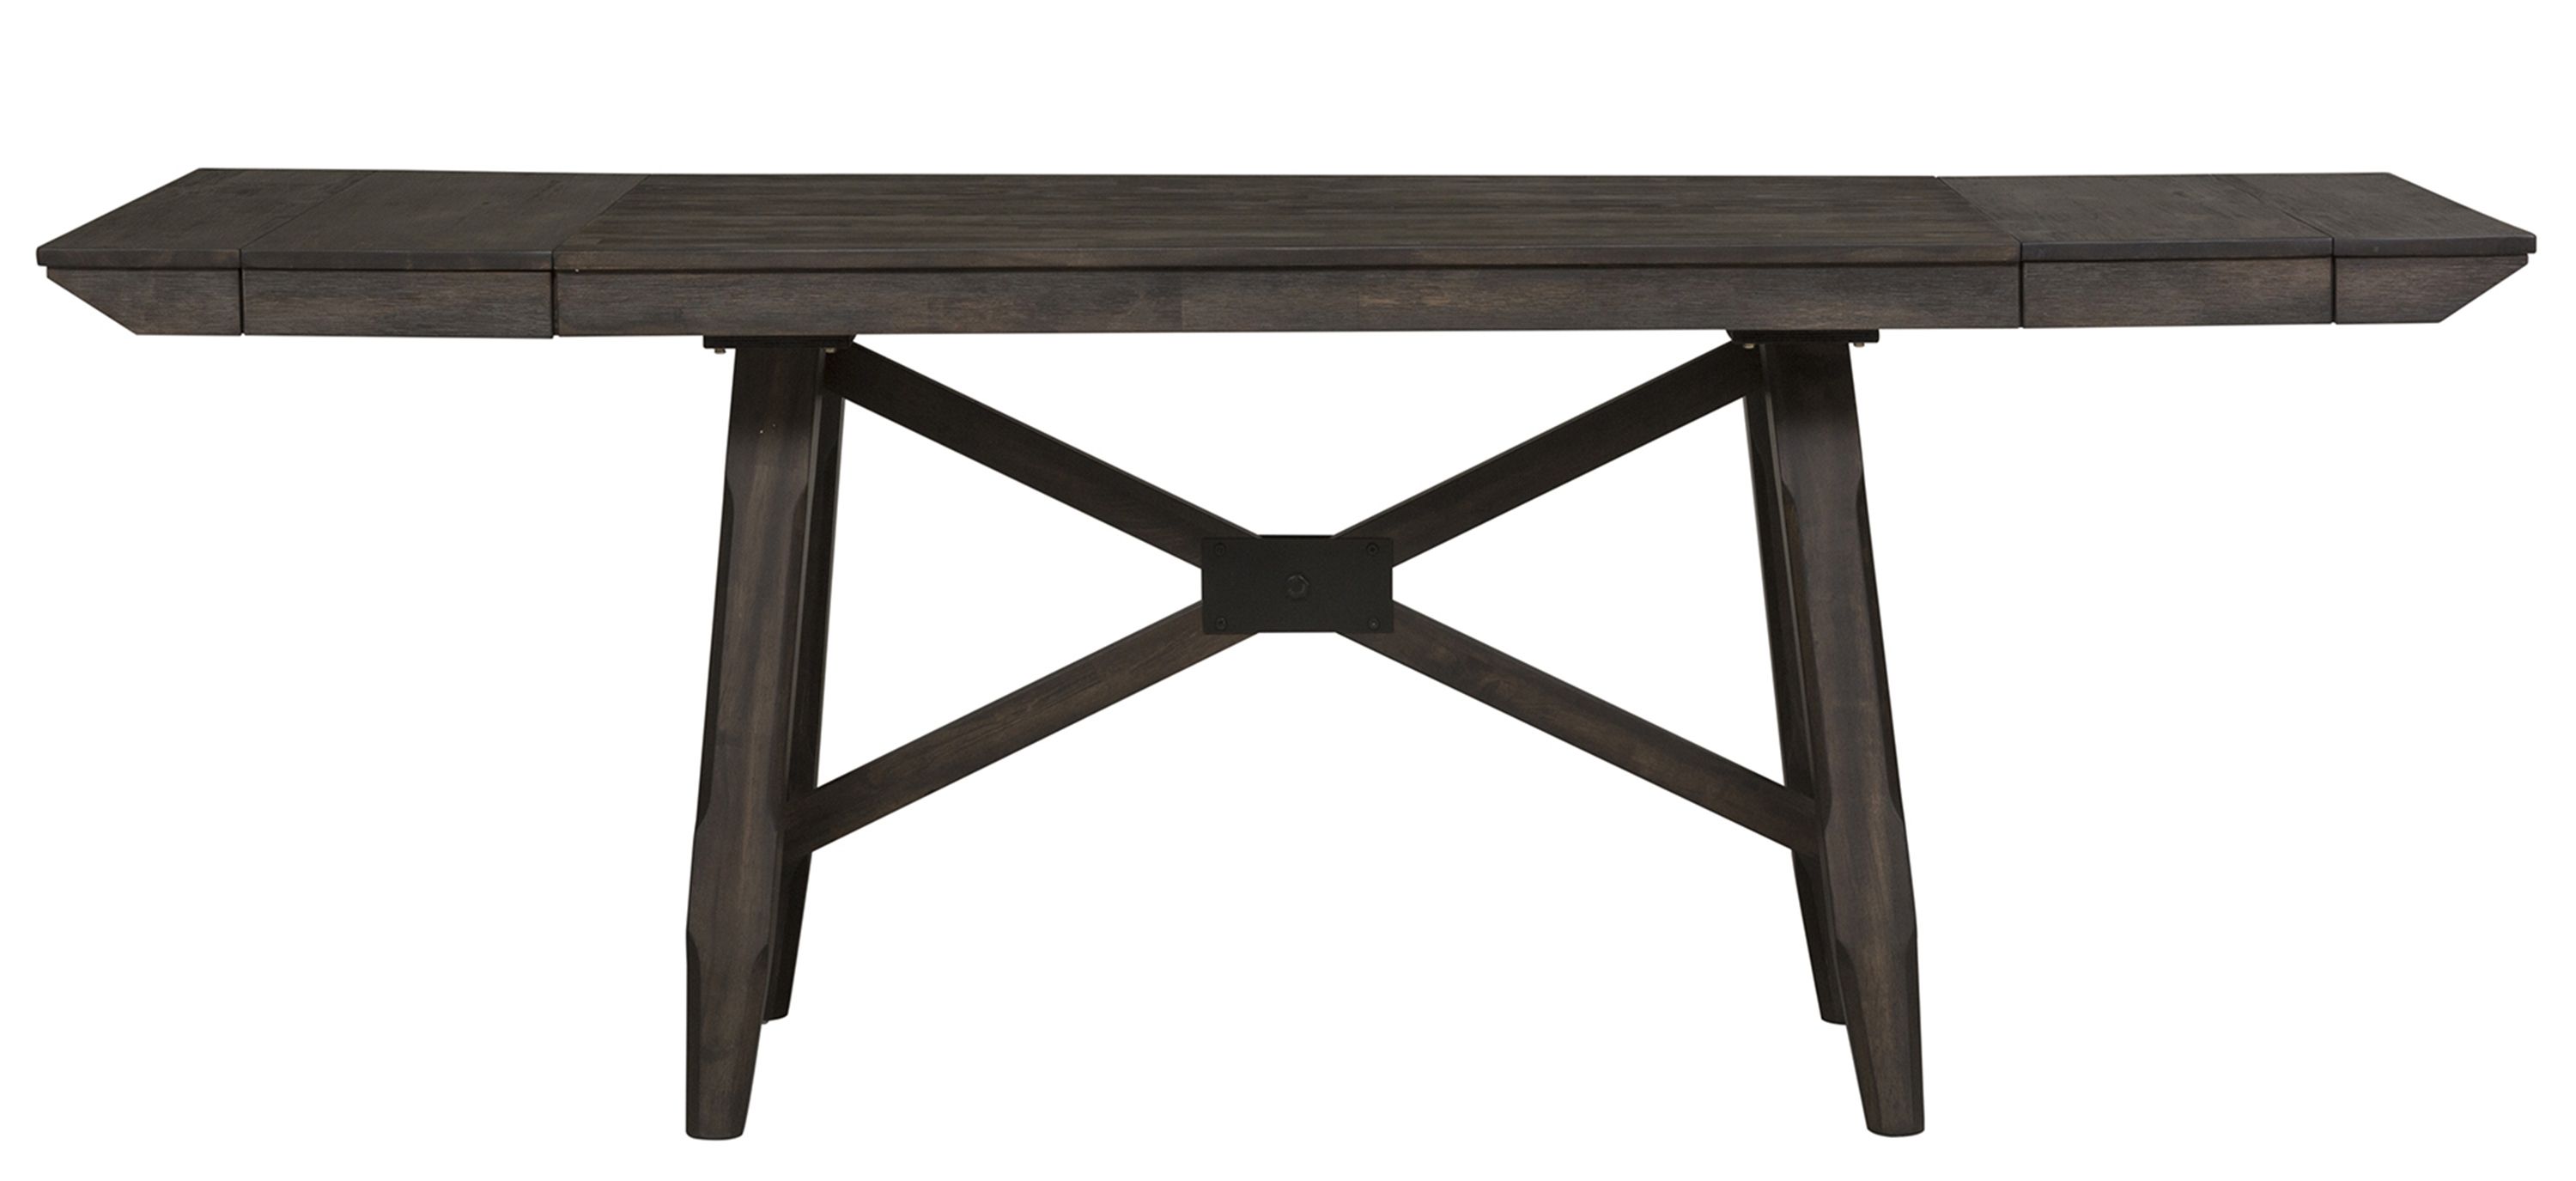 Double Bridge Counter Height Dining Table